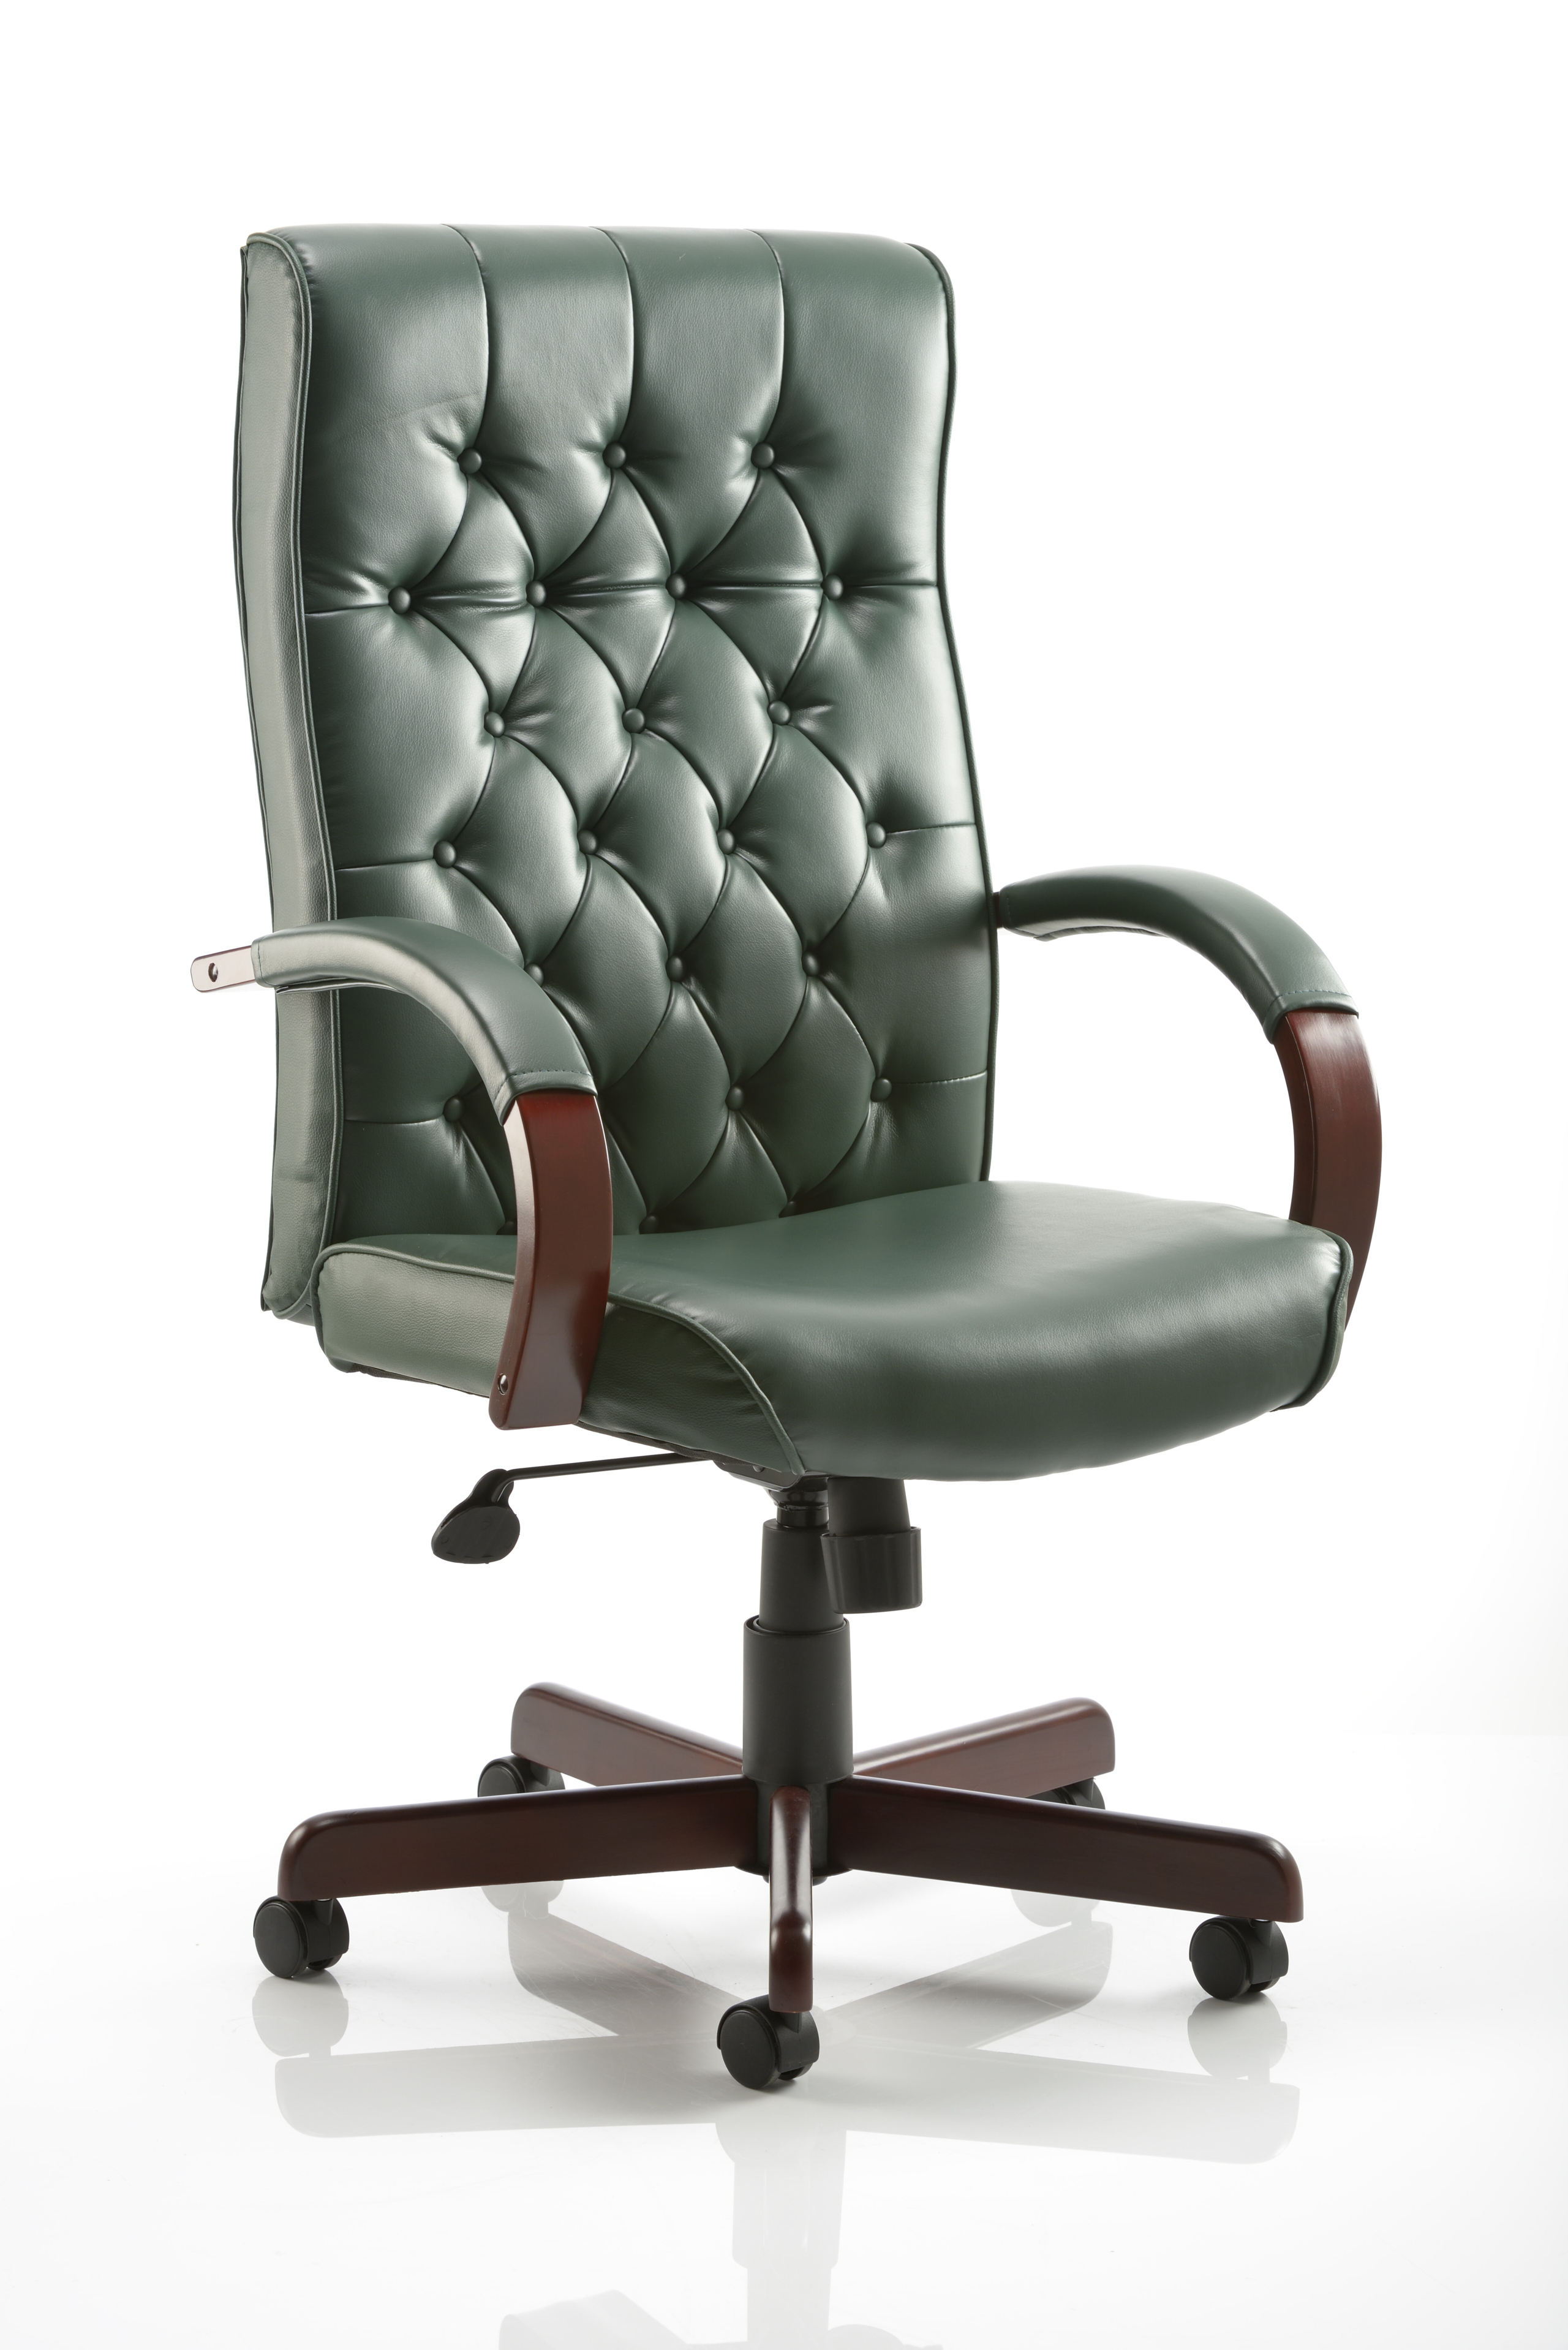 Green Leather Office Chair - Ideas on Foter